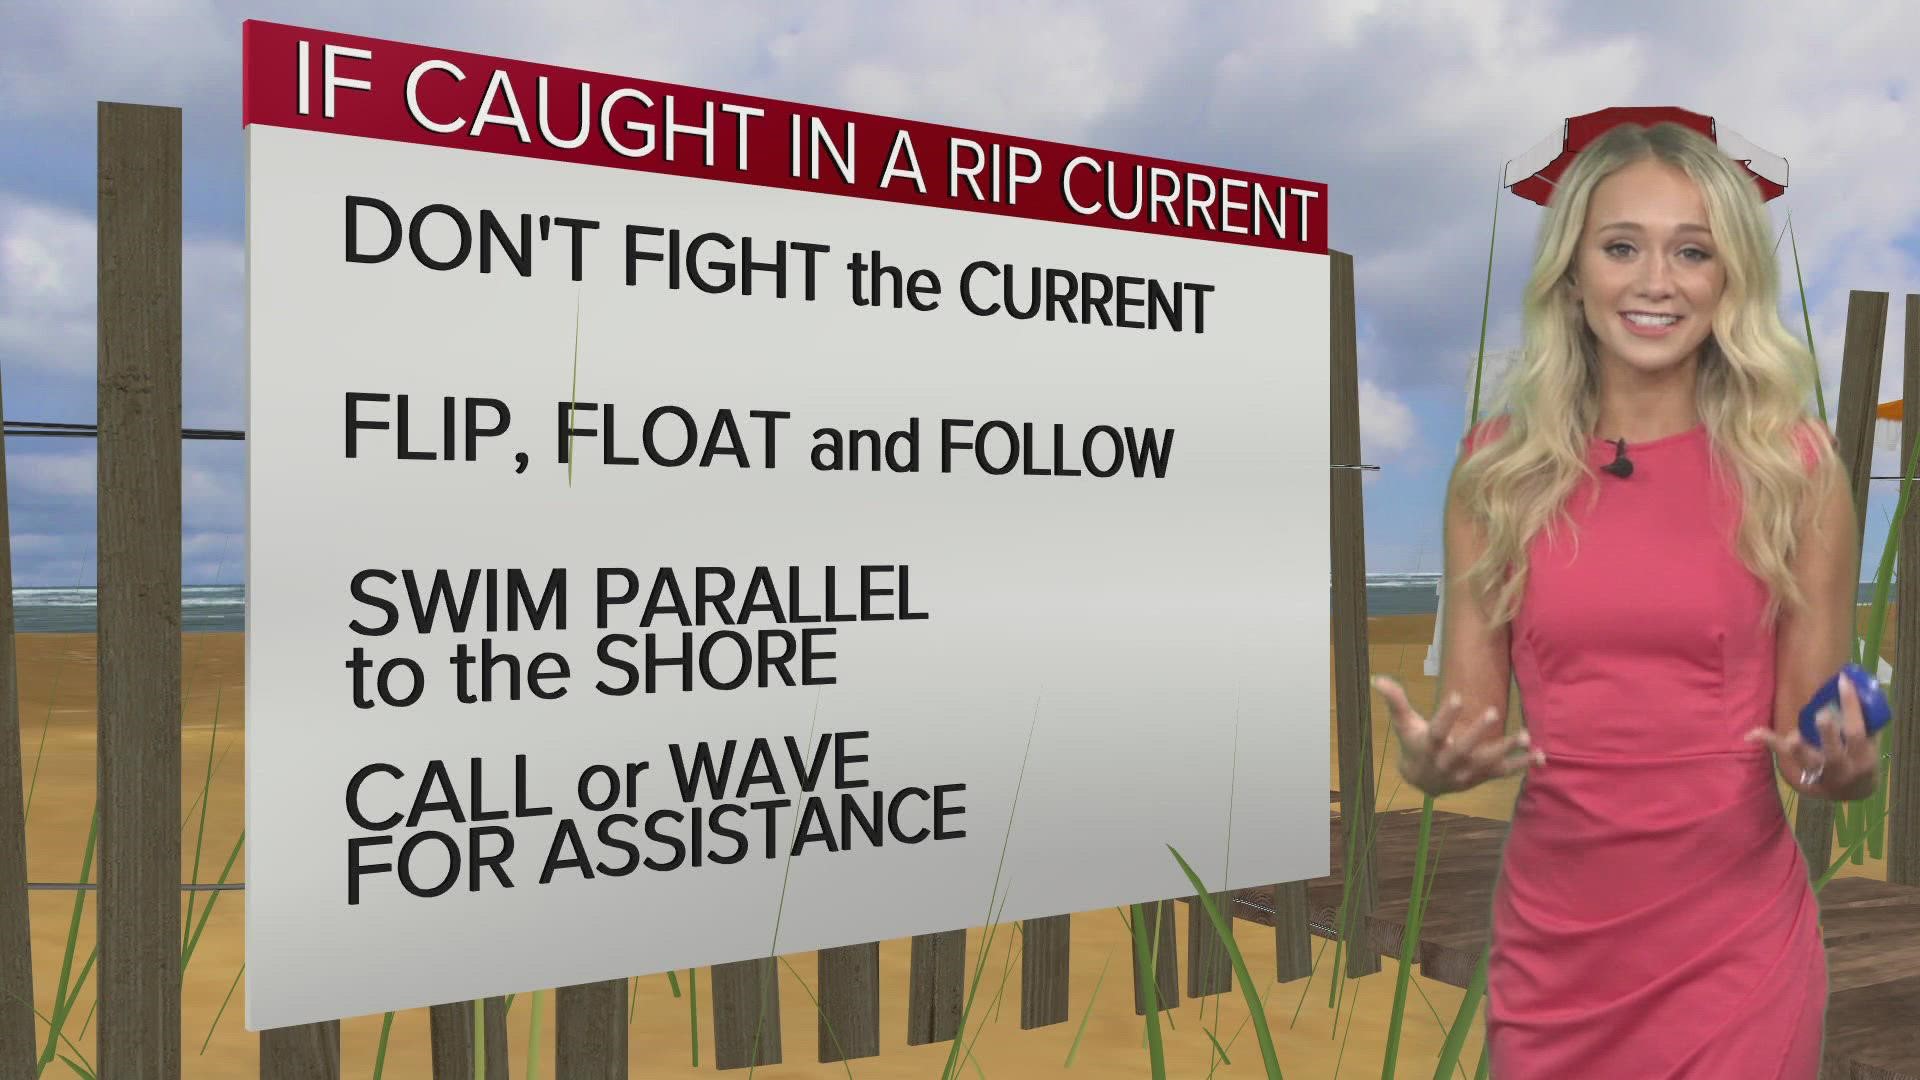 Rip currents can develop quickly and can overcome even the strongest swimmers.